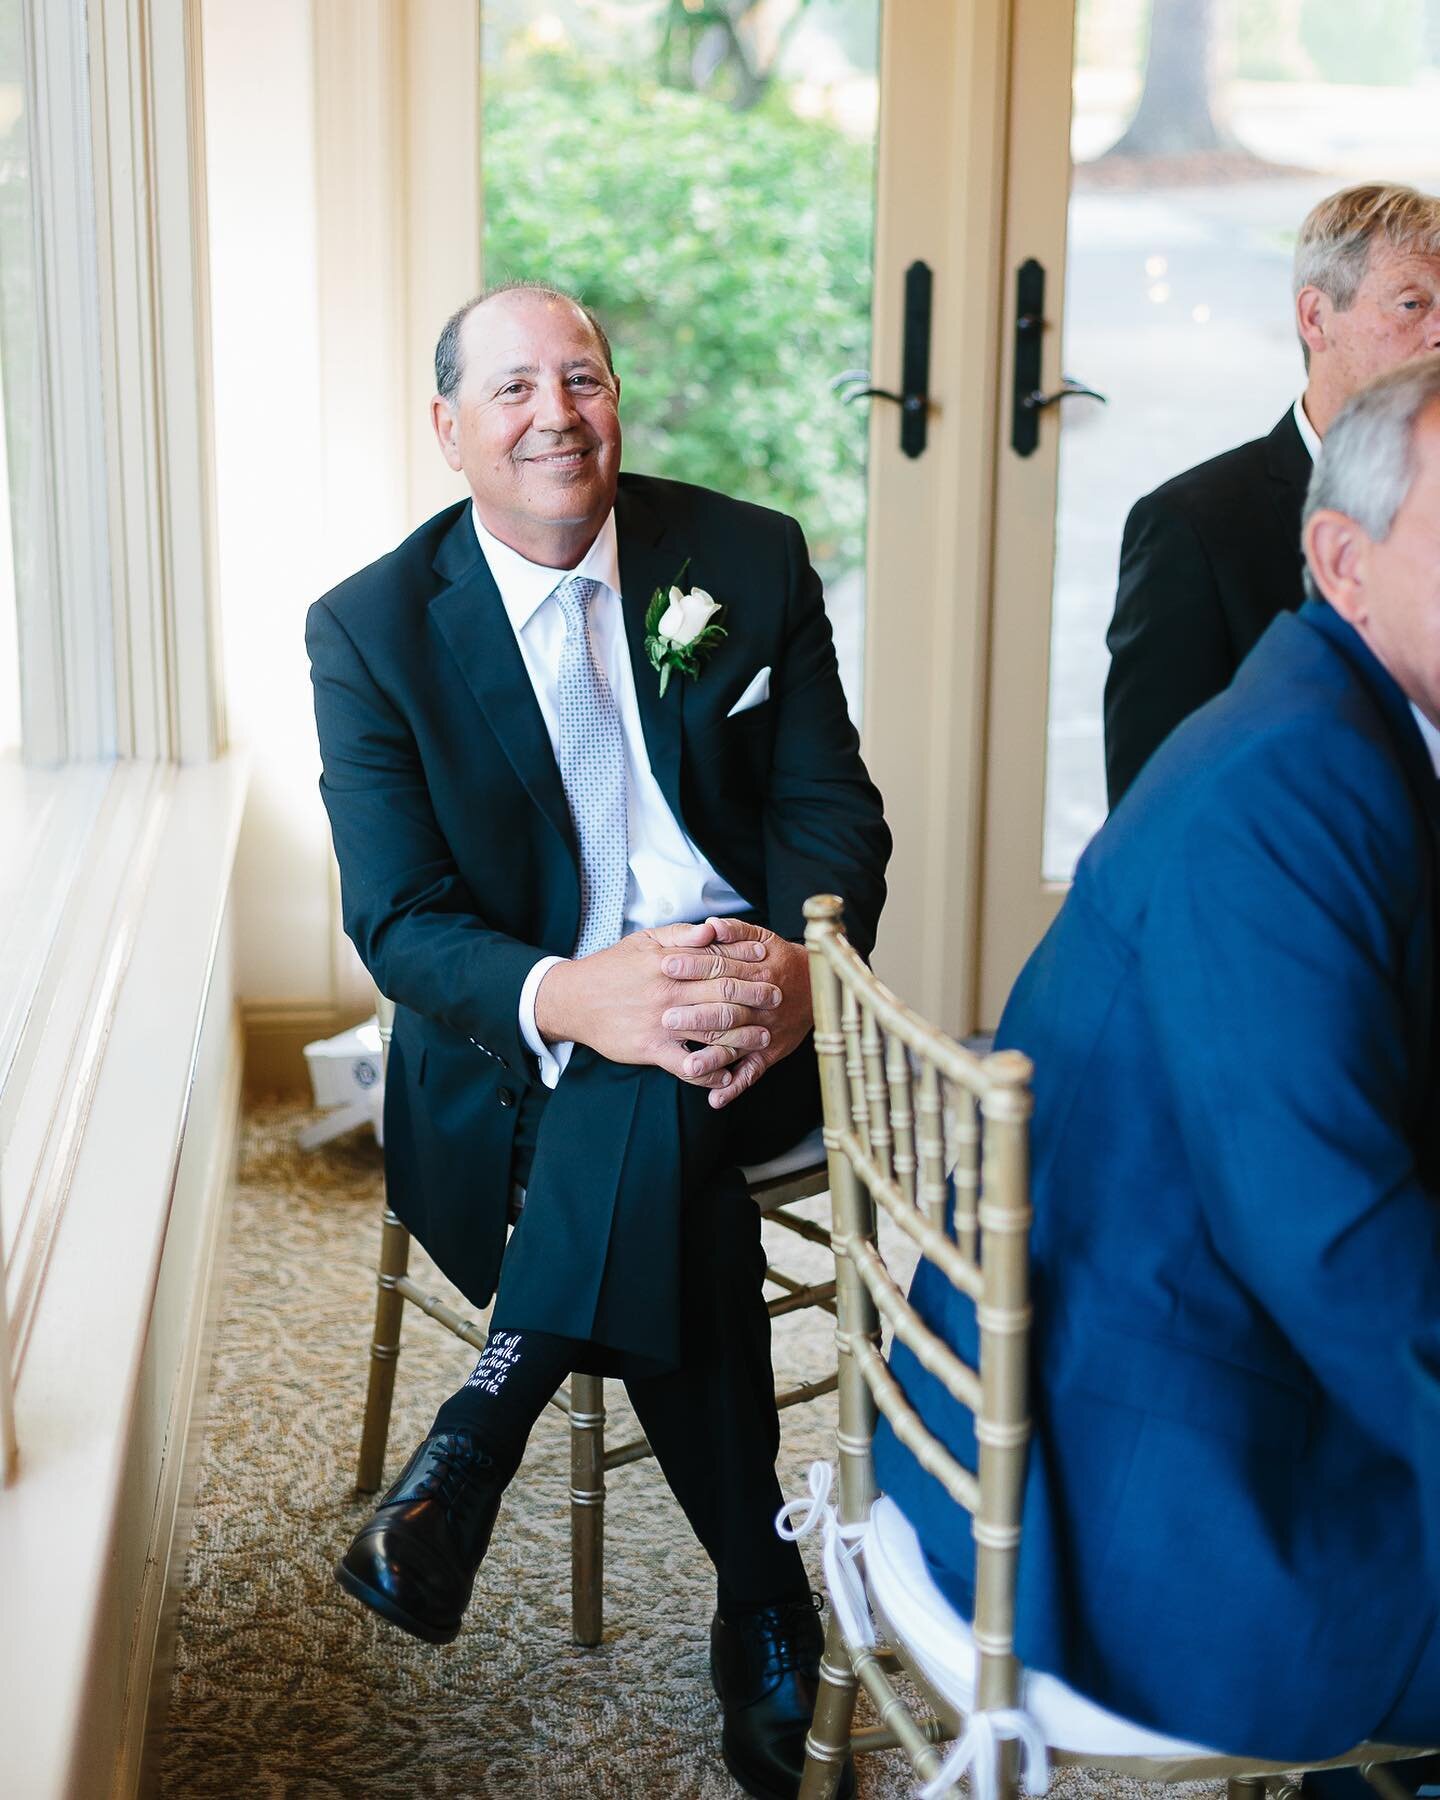 Now that&rsquo;s the face of a proud father.

#orchardstreetstudio 
#njwedding 
#offbeatbride 
#lakemohawkgolfclub